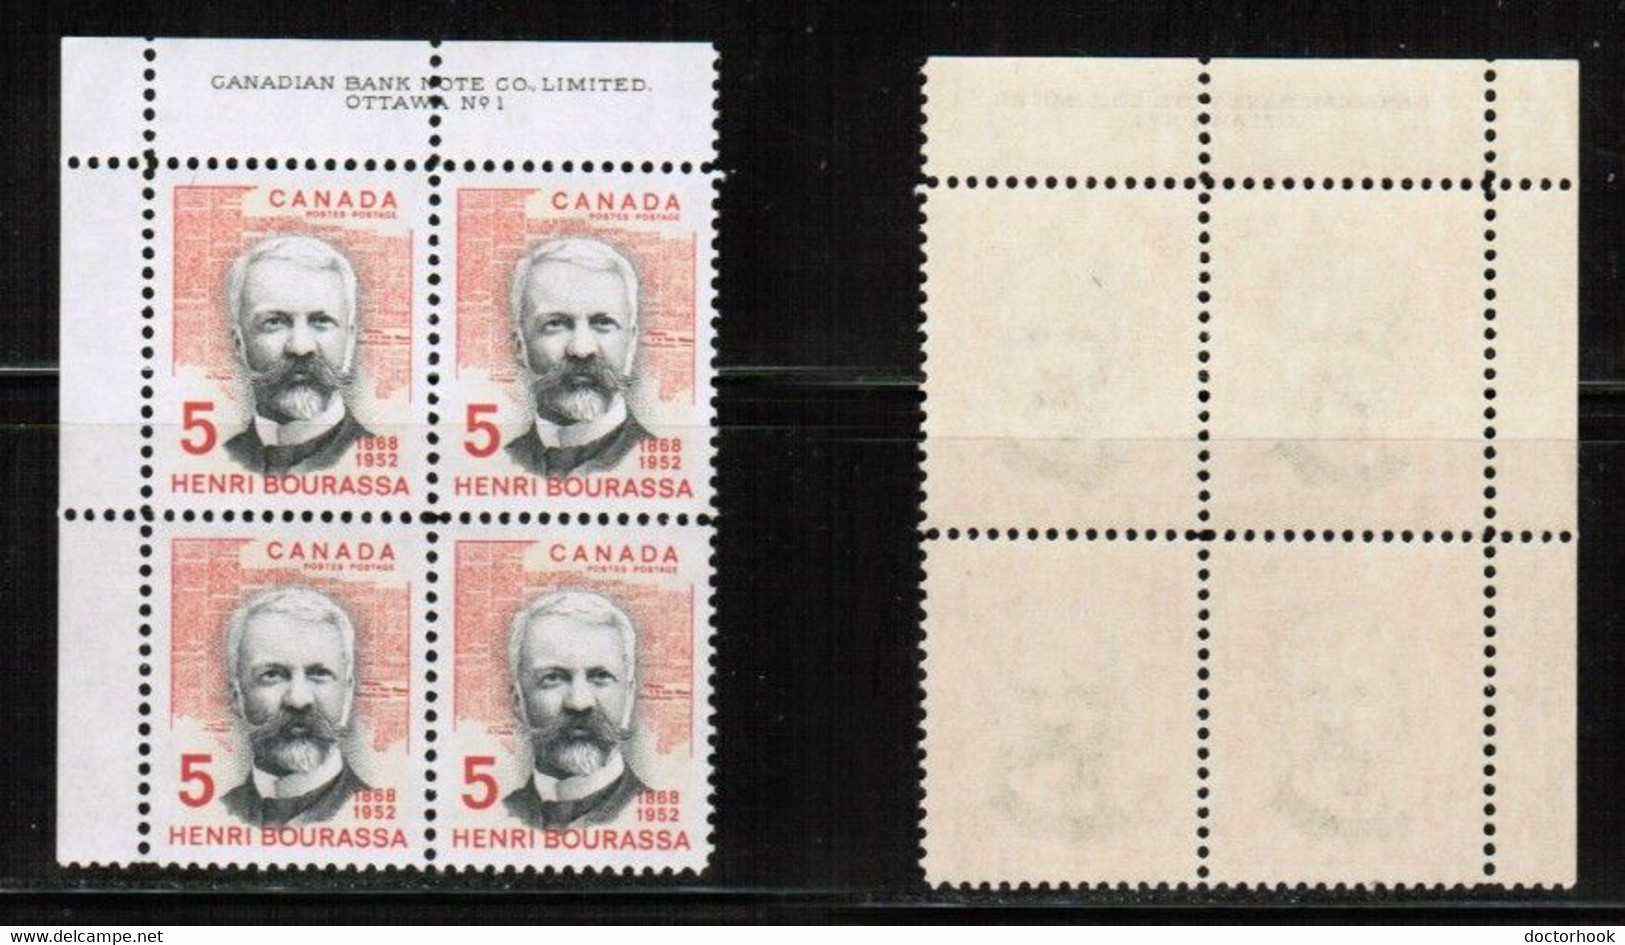 CANADA   Scott # 485** MINT NH PLATE #1 BLOCK Of 4 CONDITION AS PER SCAN (LG-1460) - Num. Planches & Inscriptions Marge